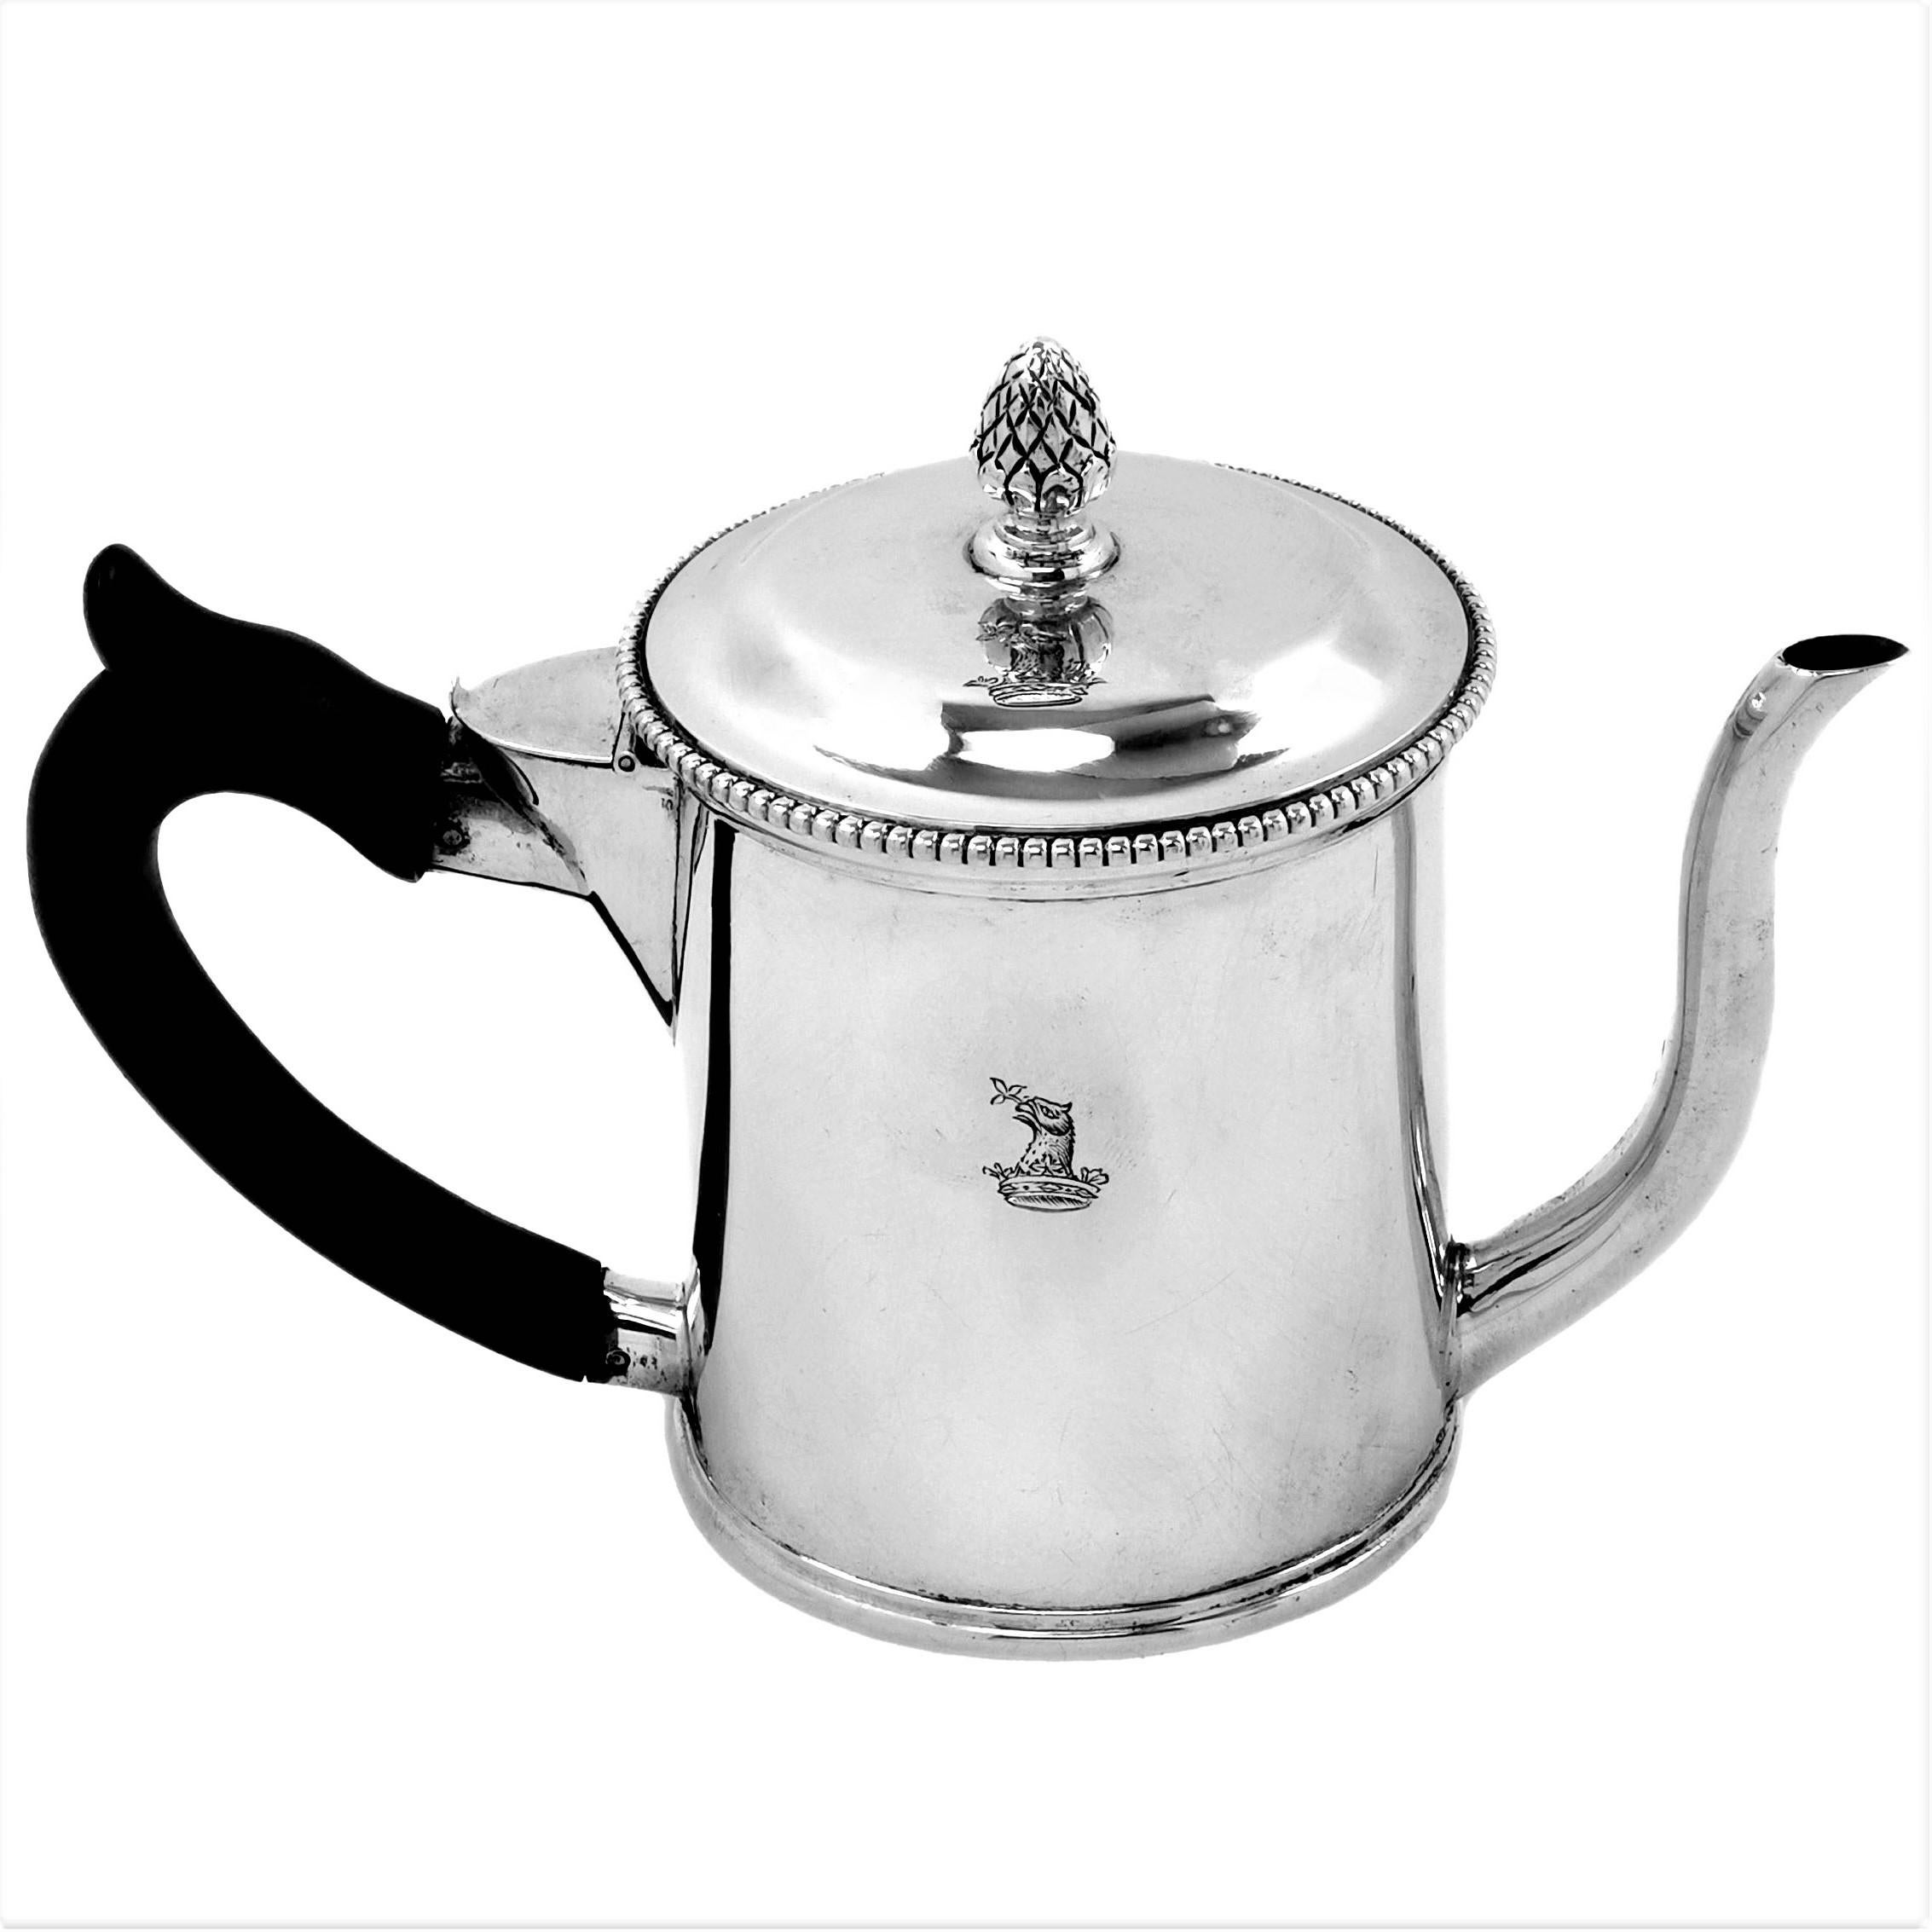 A fine antique George III Sterling Silver Argyle with an elegant straight sided design. The Lid of the Gravy / Sauce Argyle has a beaded rim and an decorative finial. This 18th century Argyle has a wooden handle and a small crest engraved on the